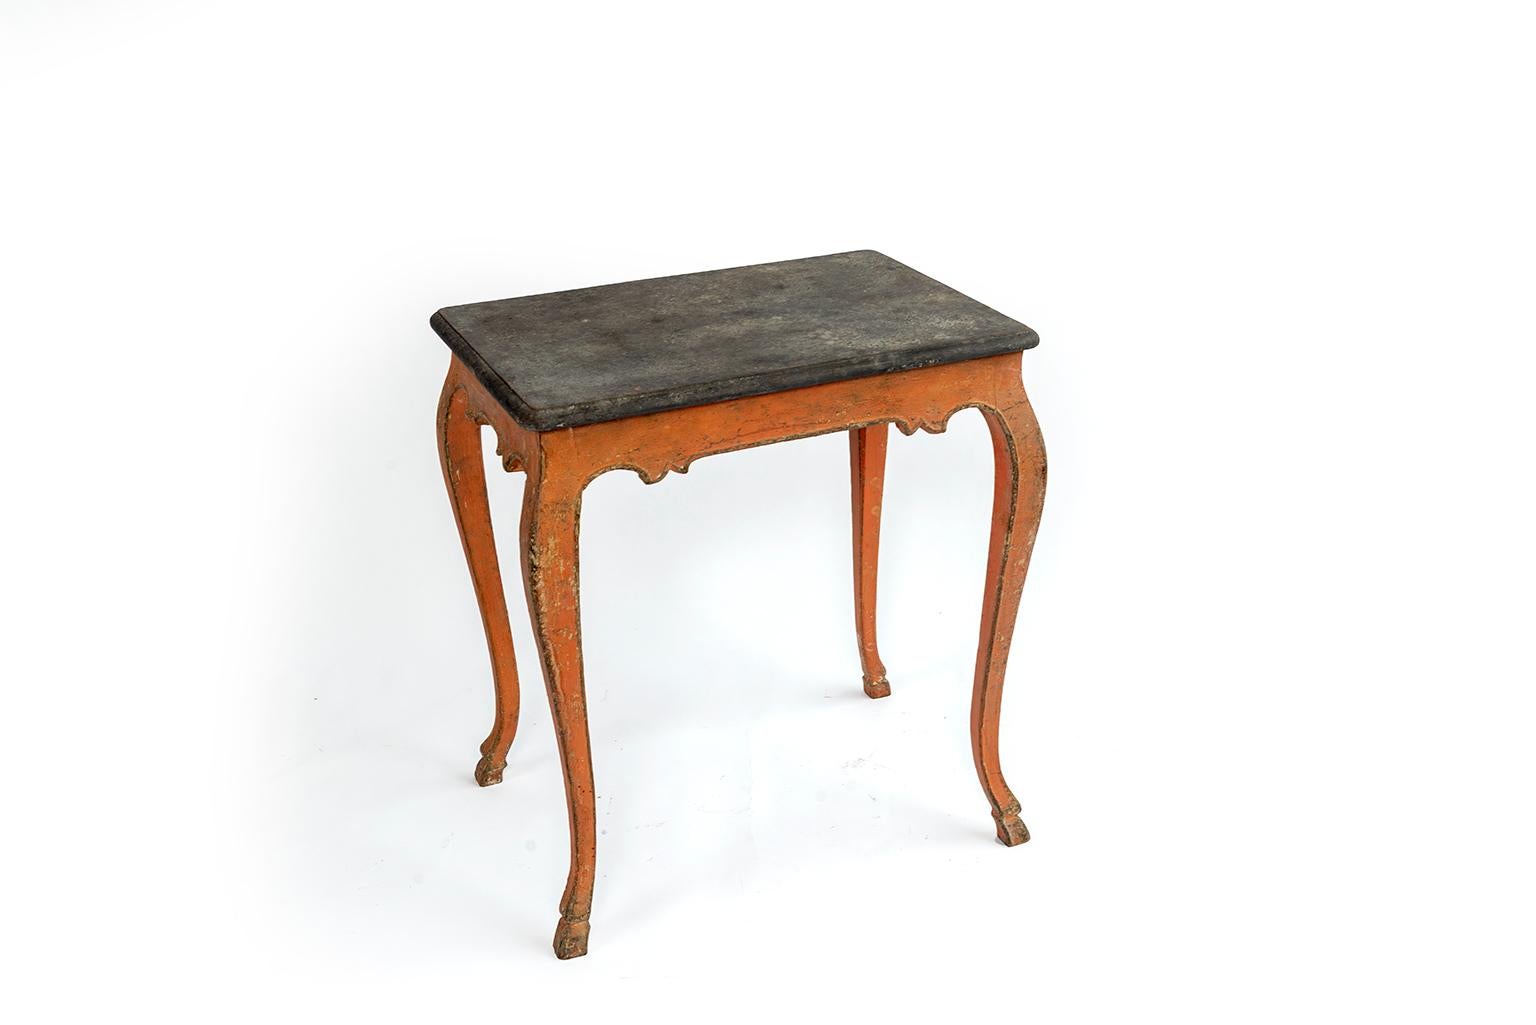 French Salmon Painted Side Table with an Ebonized Painted Top